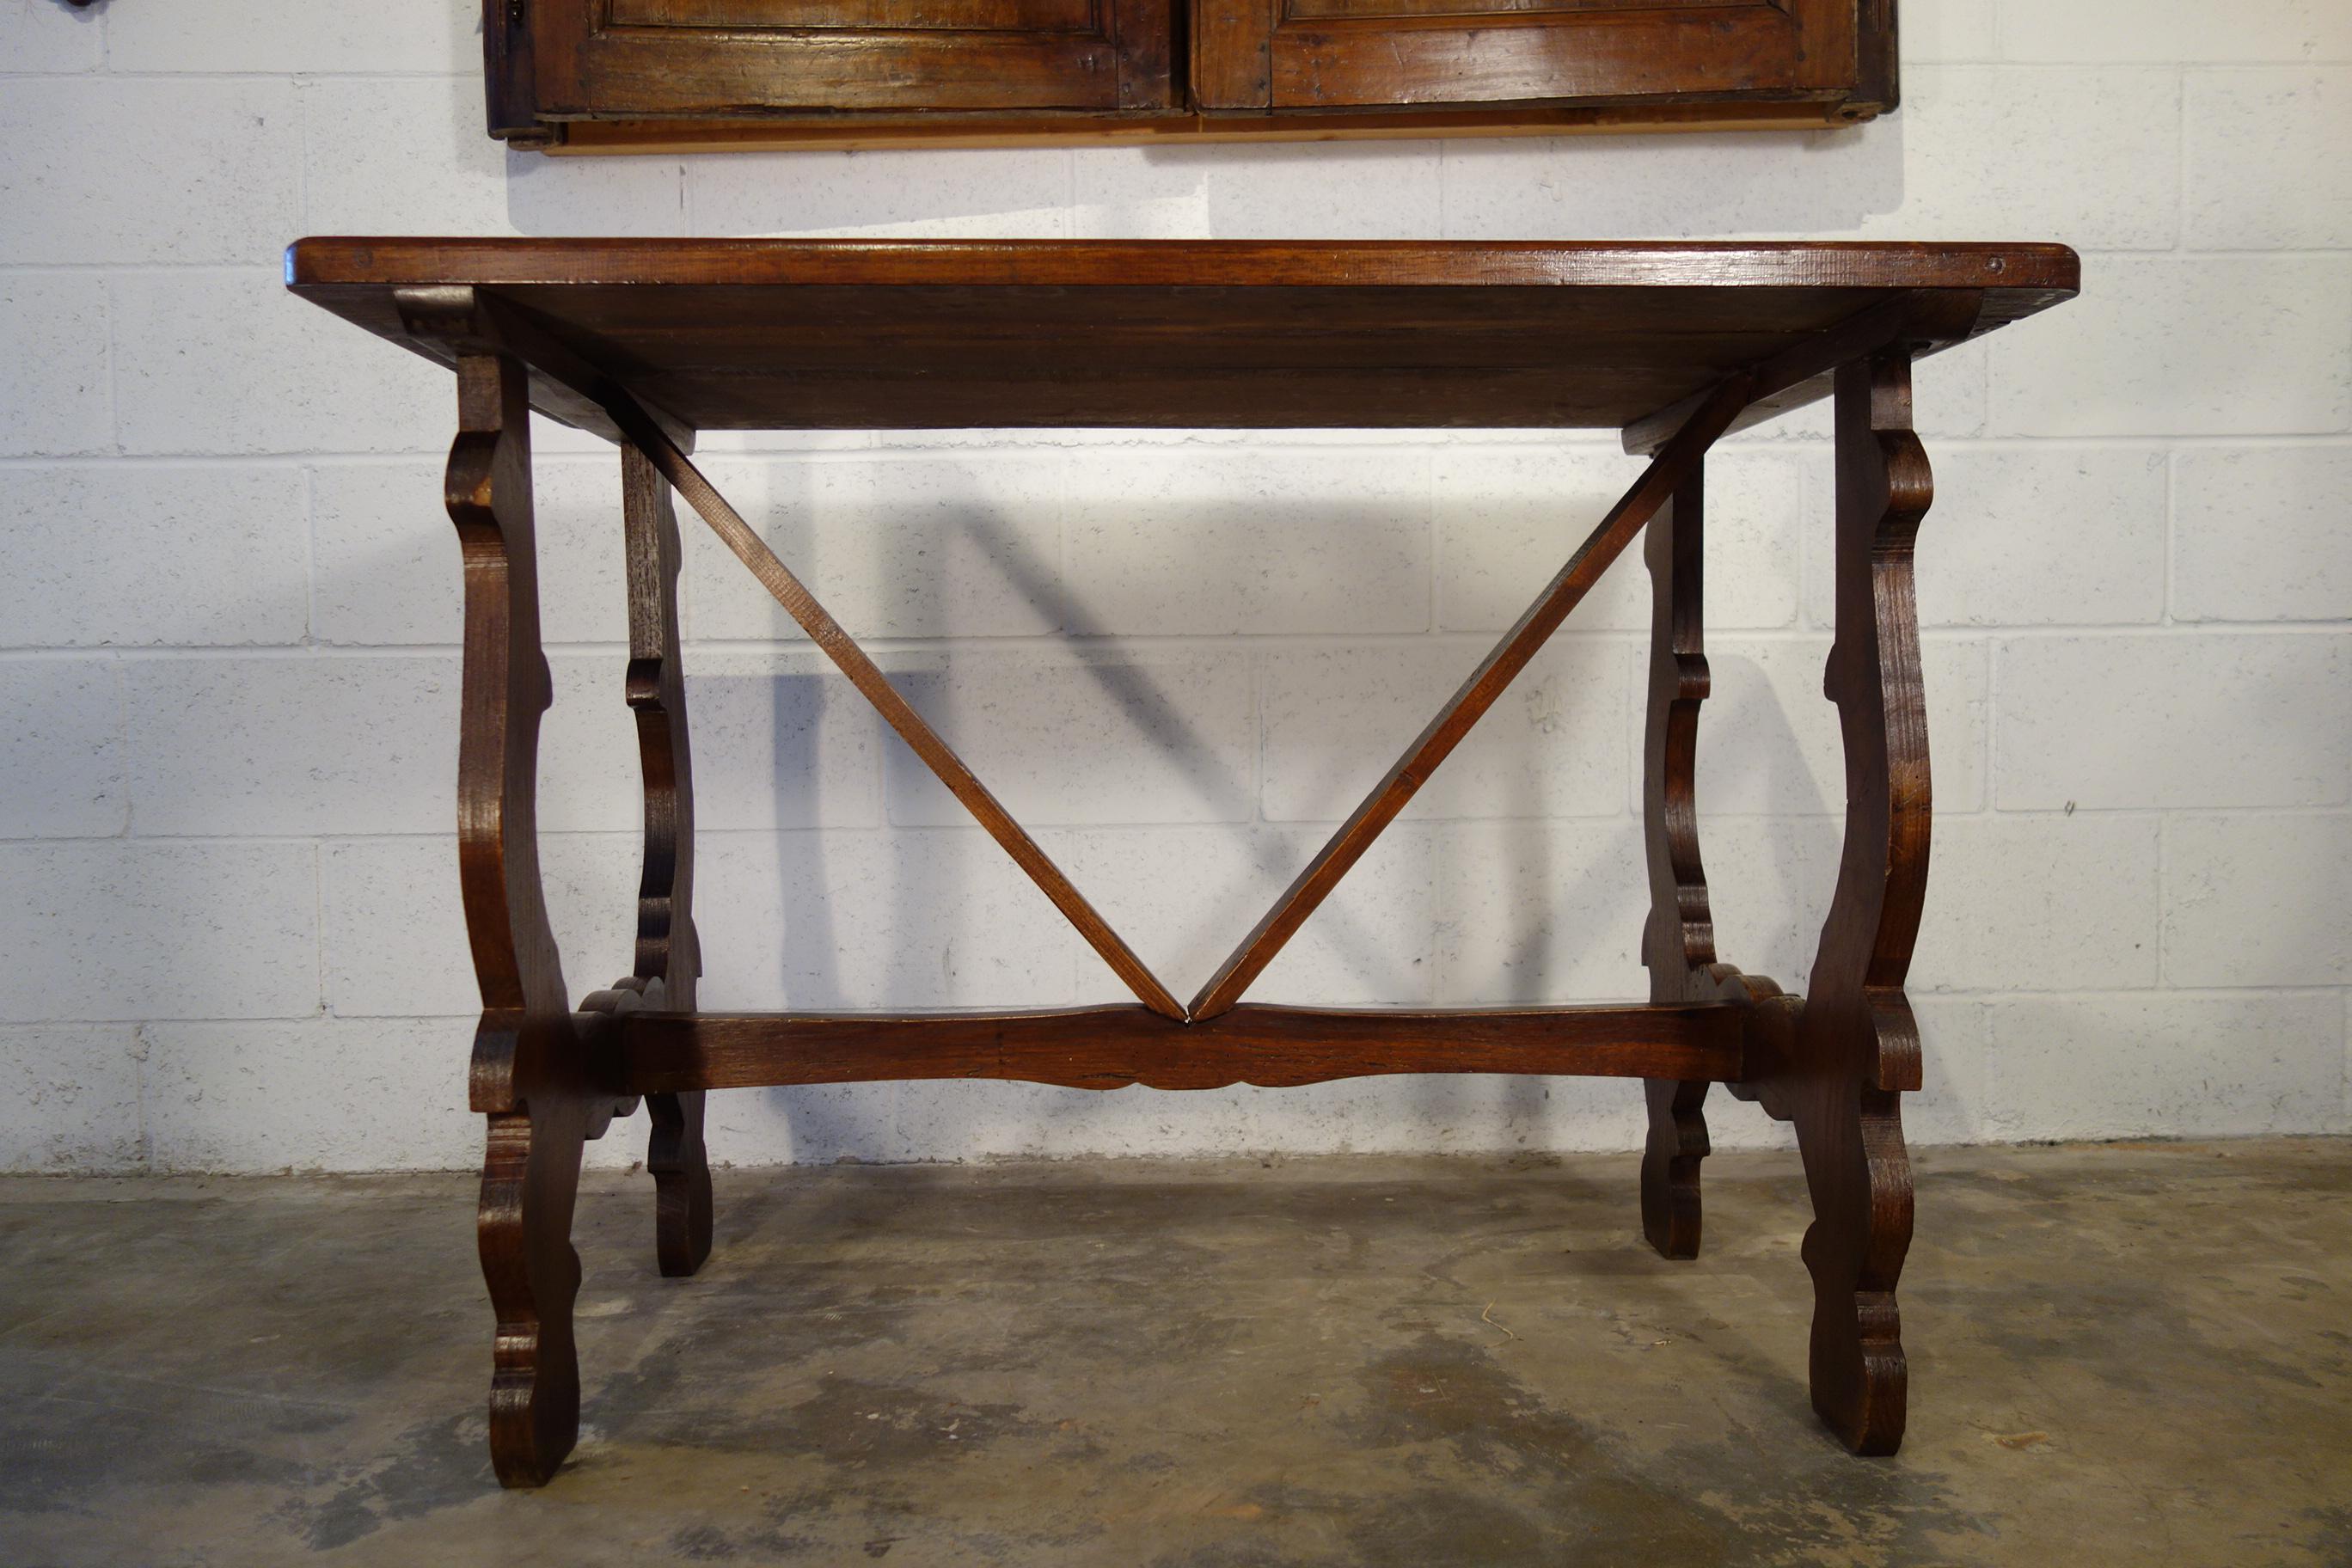 Antique Italian Tuscan Renaissance Refectory Style Hand Crafted Oak Farm Table For Sale 8